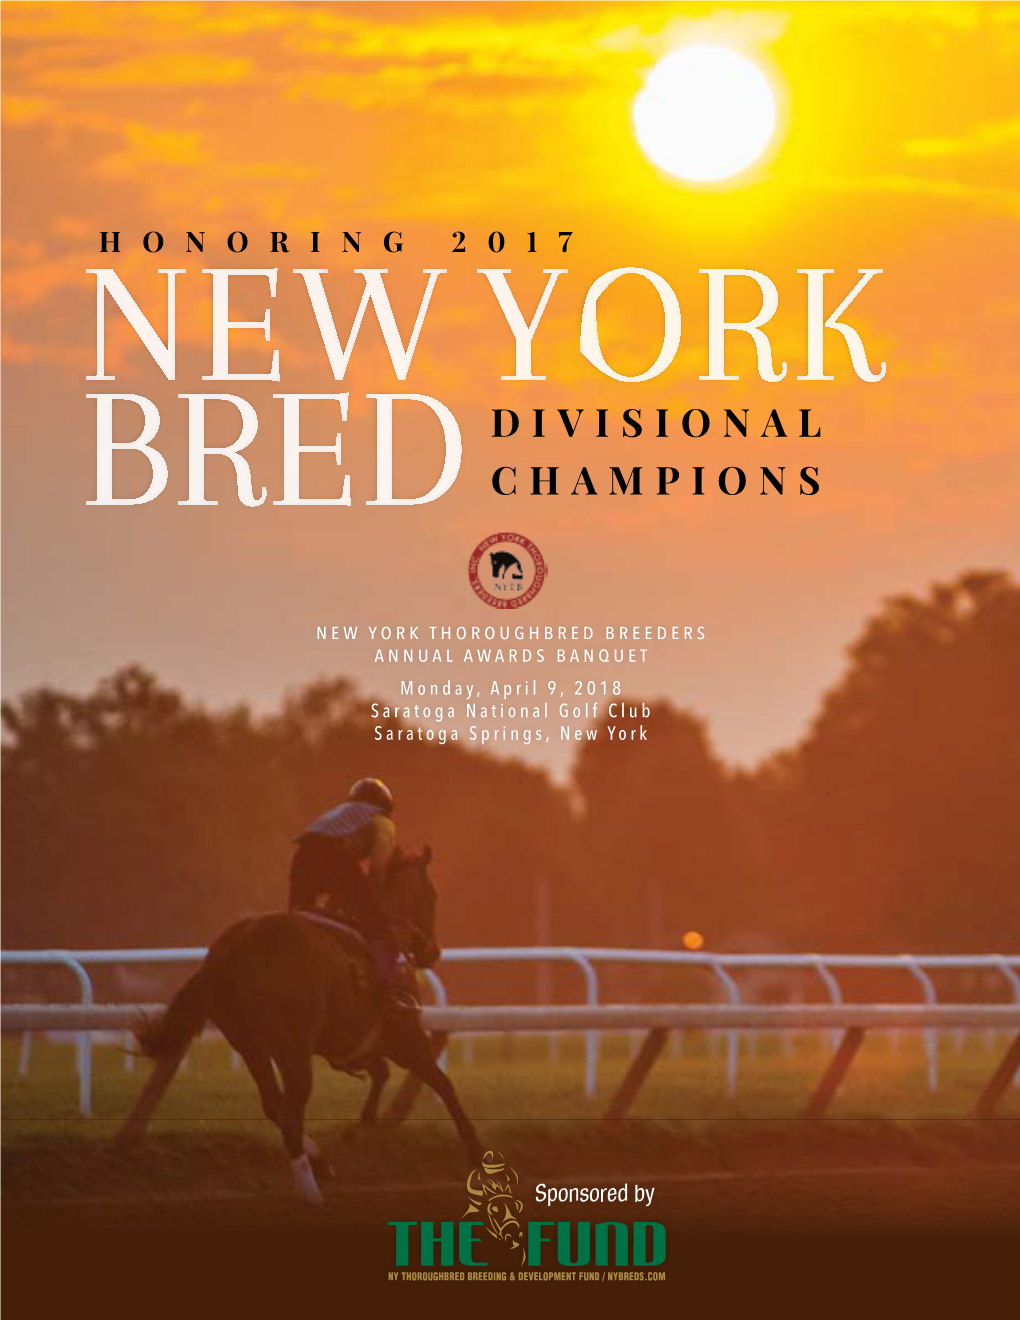 Divisional Champions, Followed by the Announcement of the 2017 New York-Bred Horse of the Year